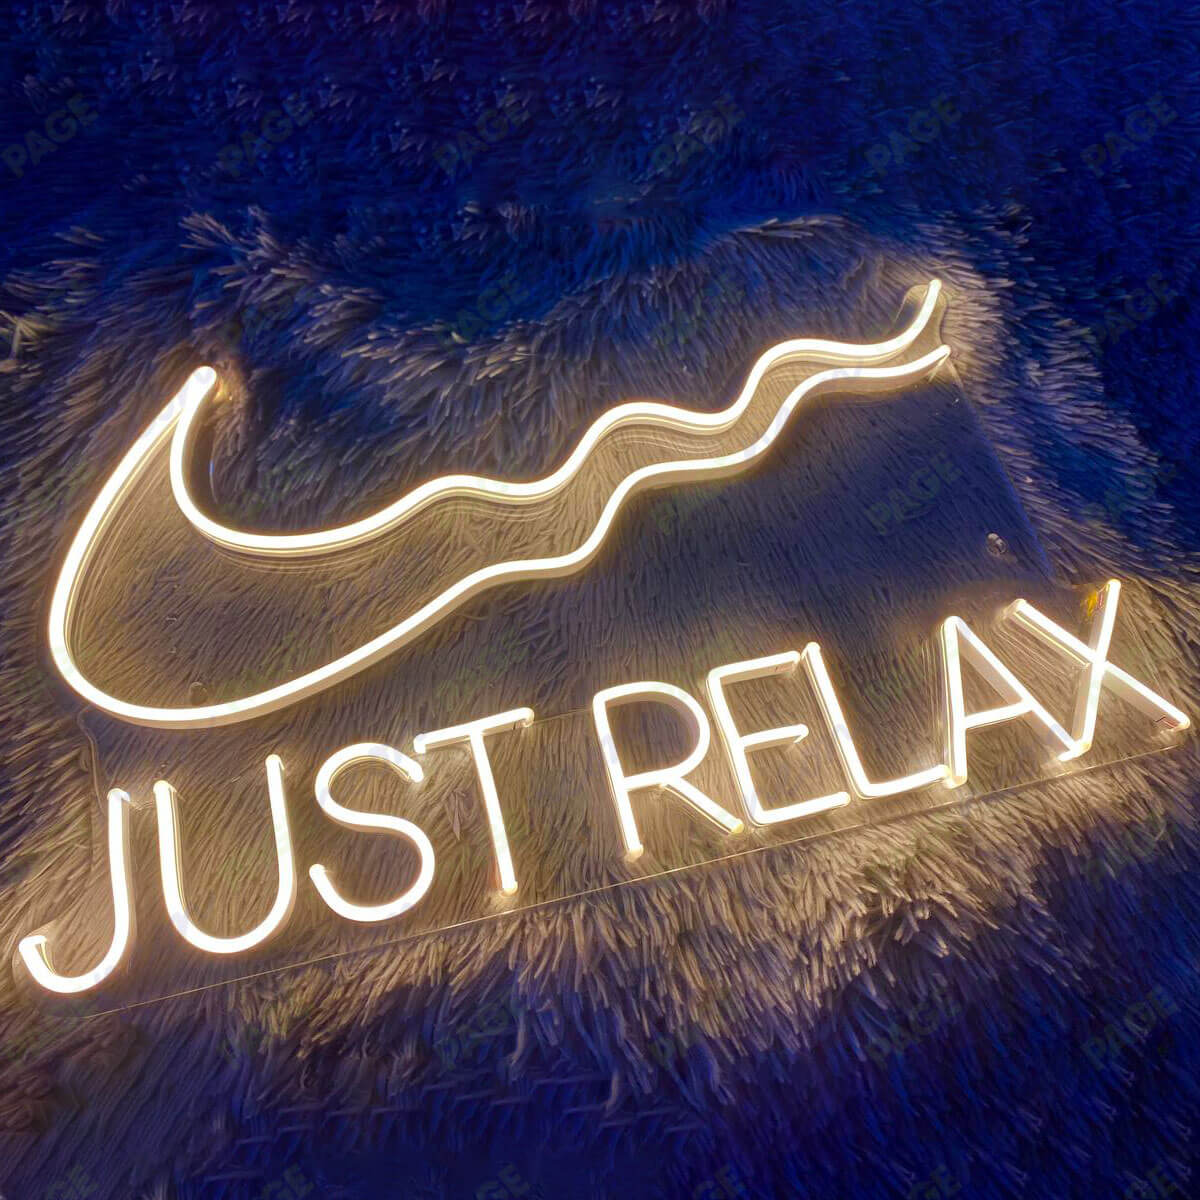 Just Relax Neon Sign Inspirational Led Light Feature